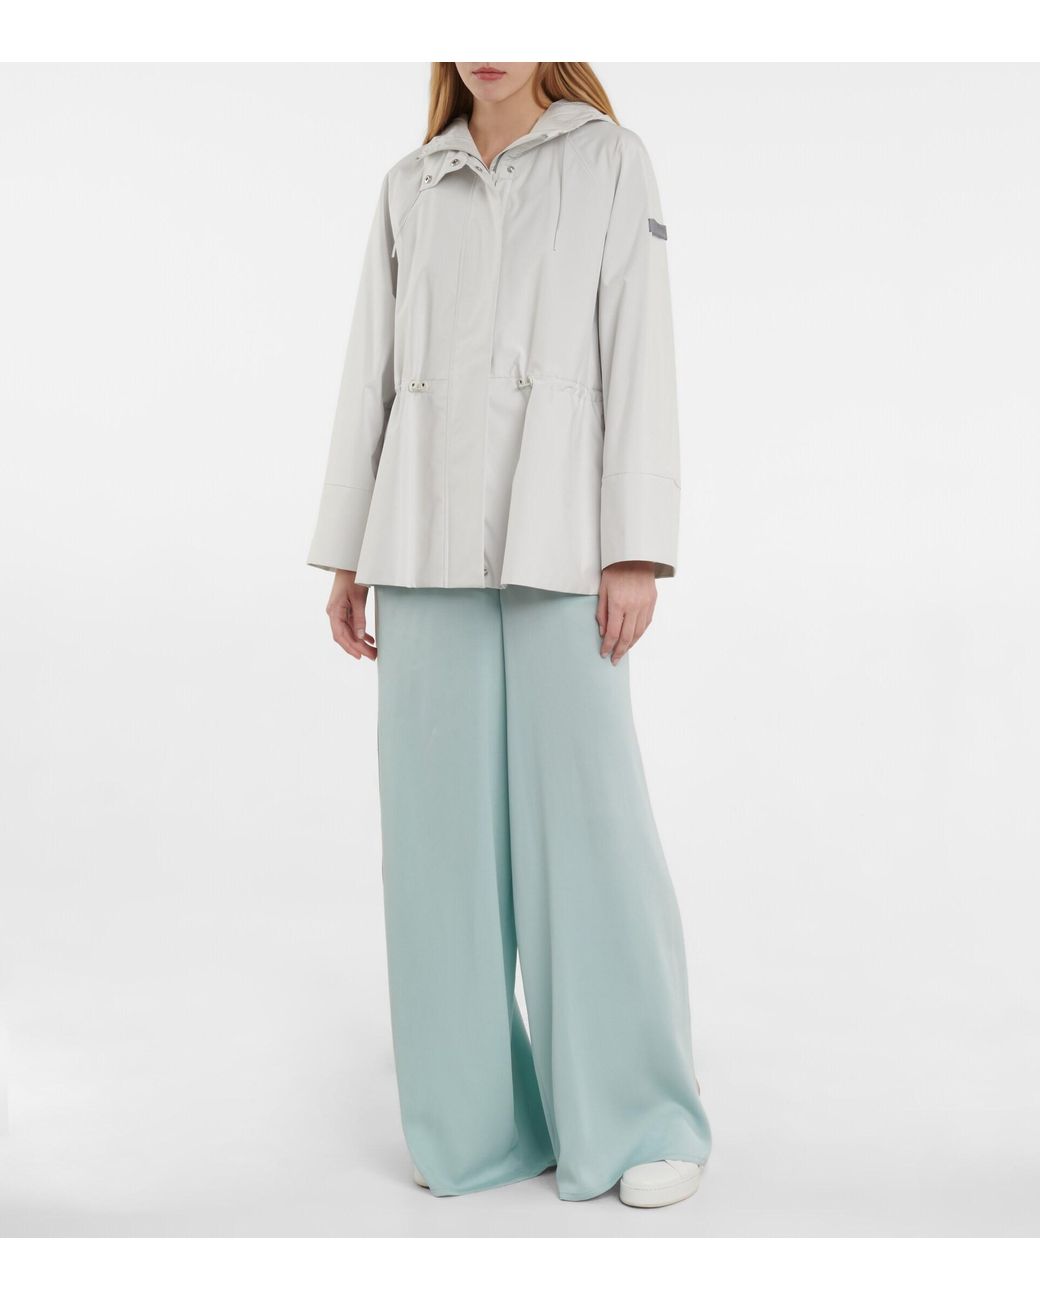 Max Mara Leisure Sapore Hooded Jacket in White | Lyst